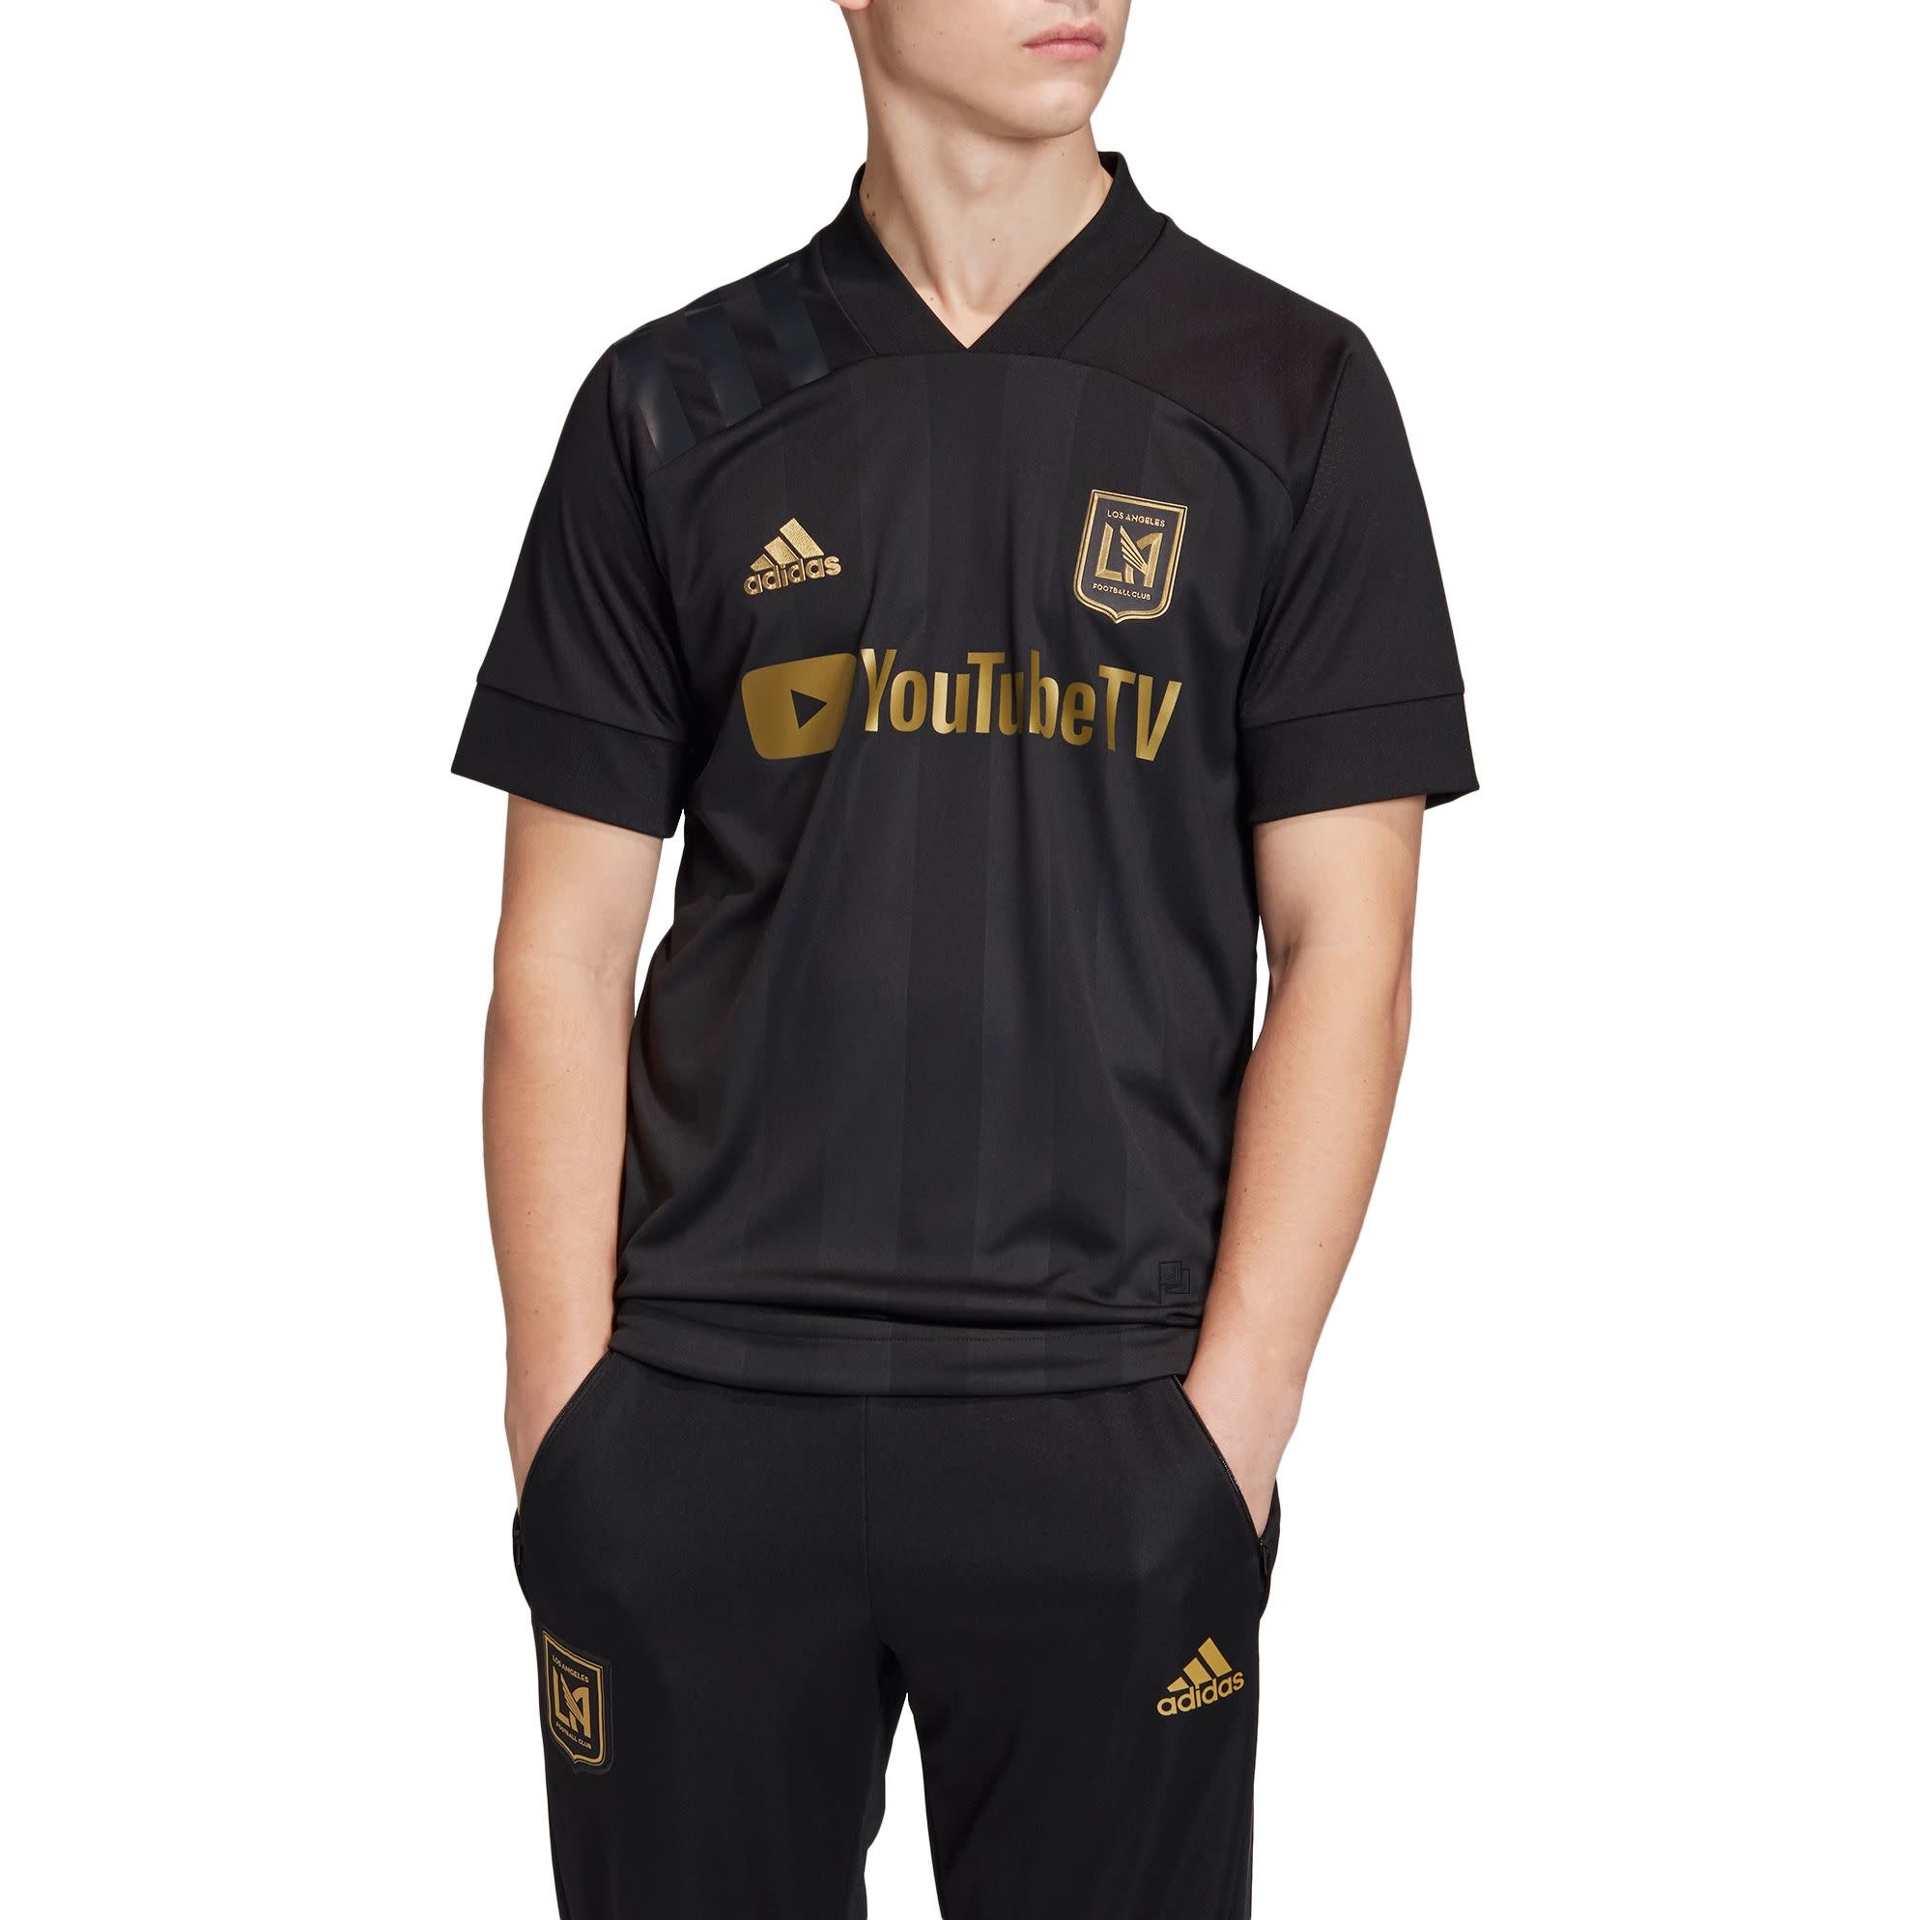 LAFC Adidas 20 Youth Replica Jersey Black - The Locker Room of Downey